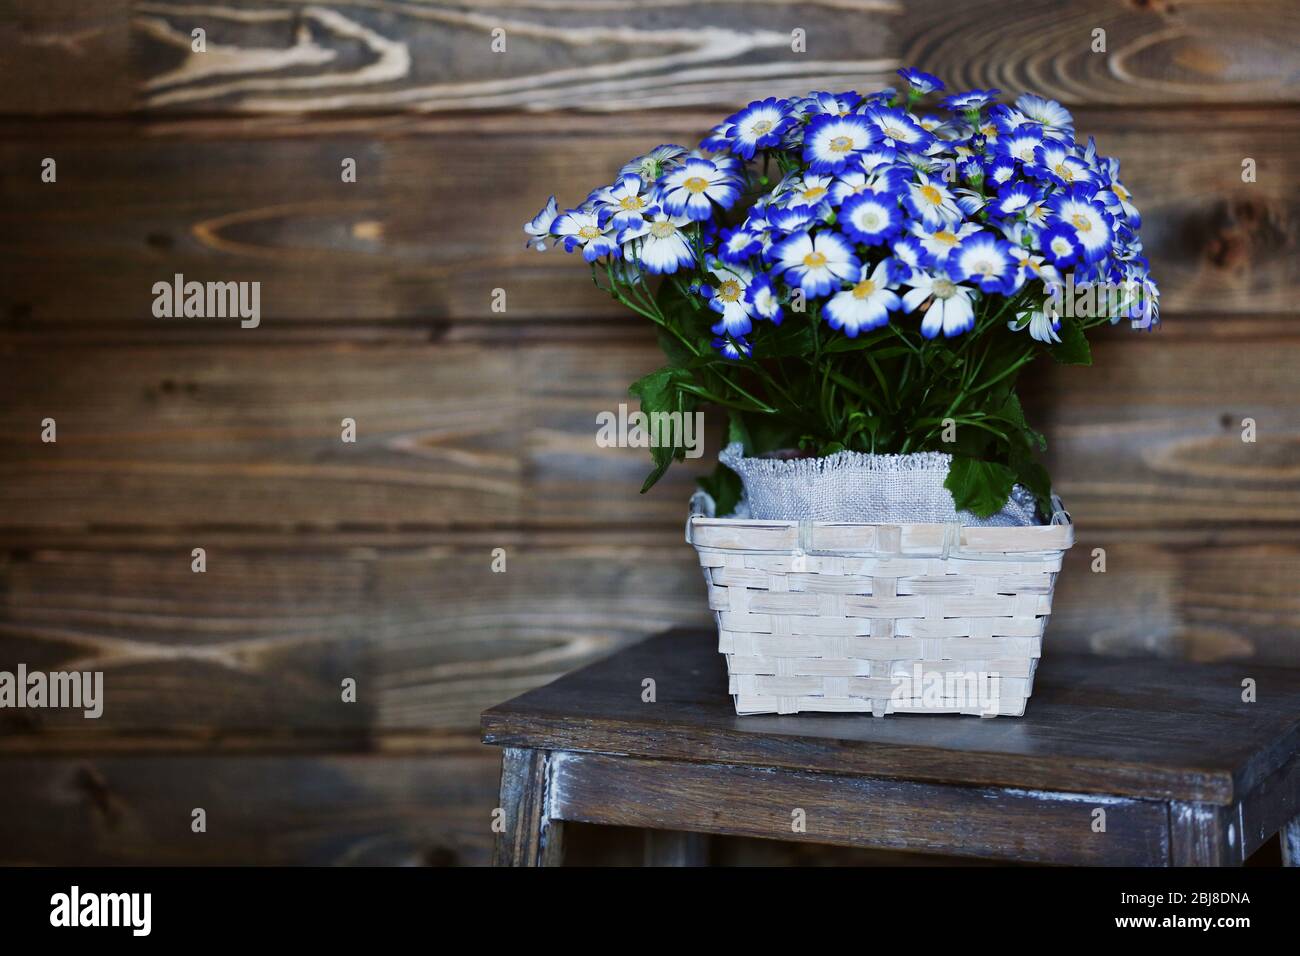 Fresh cinerarias in a basket on wooden background Stock Photo